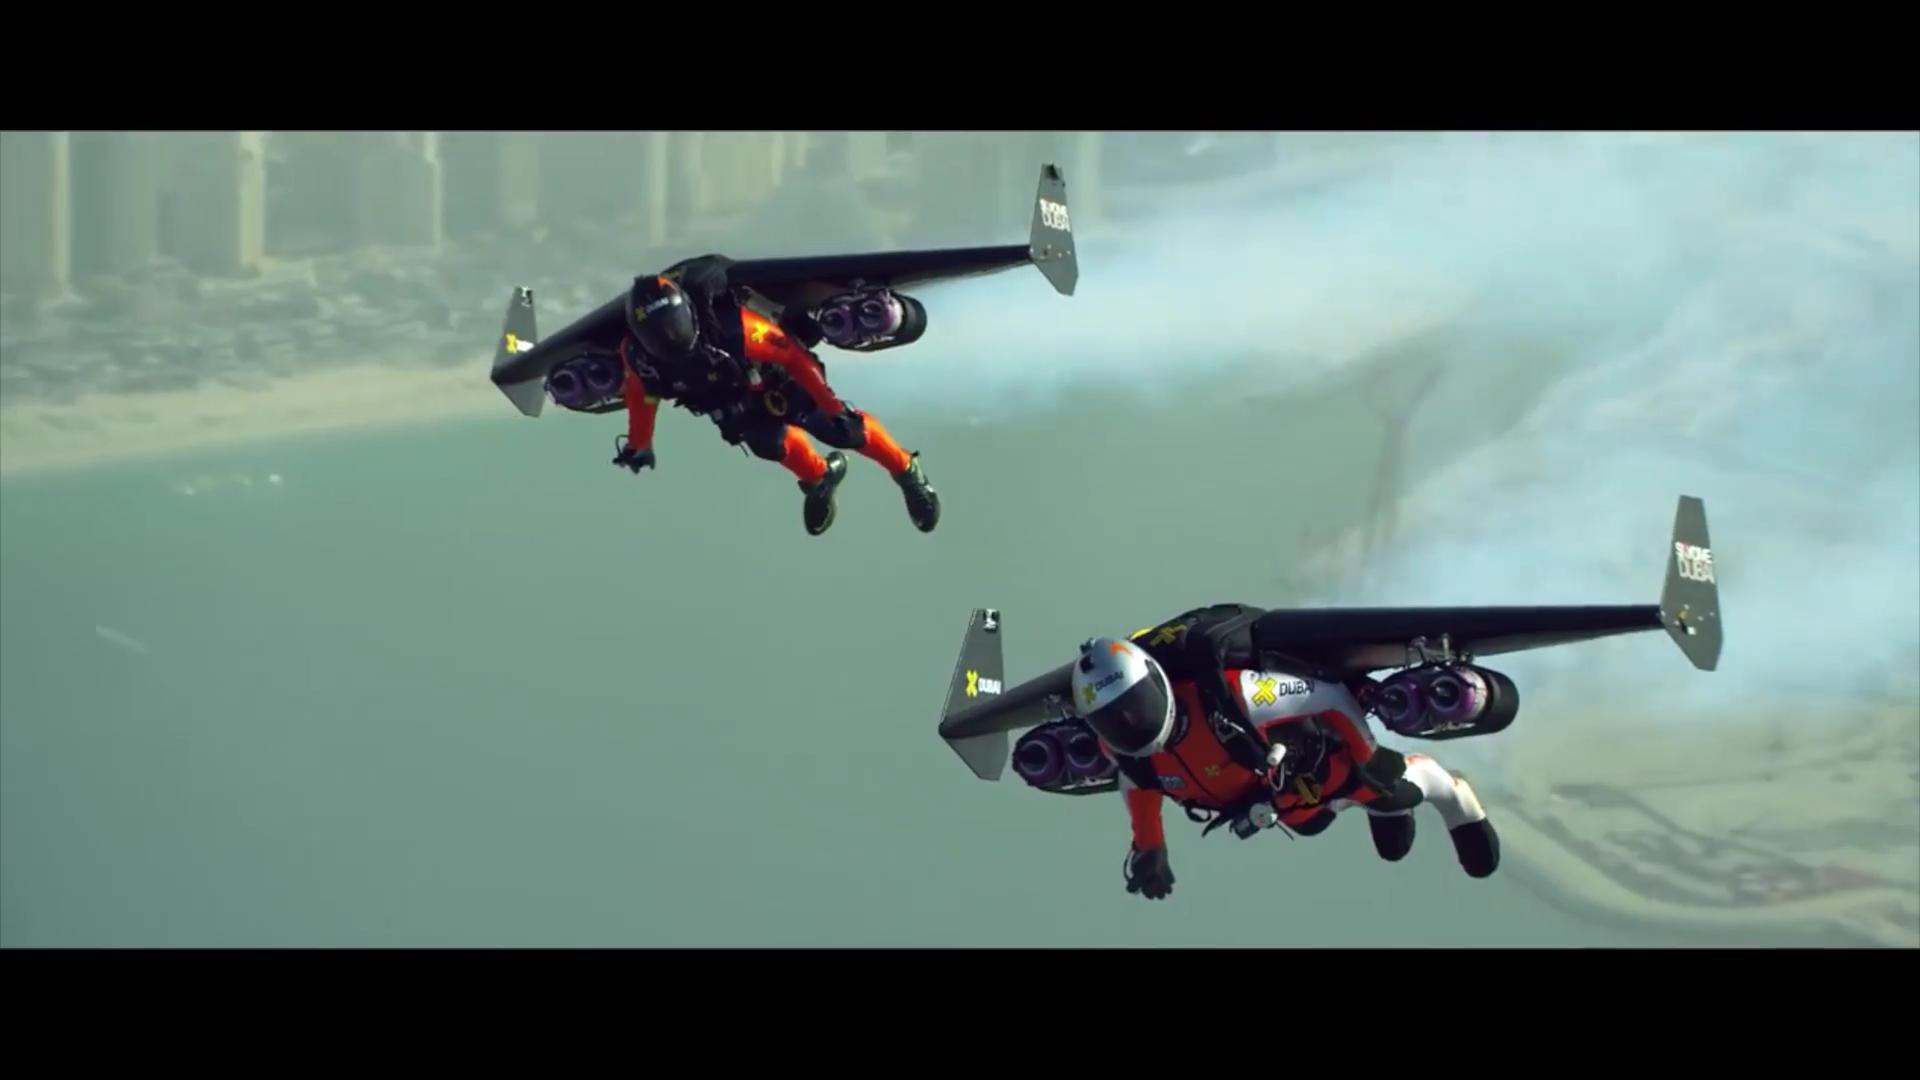 Those two guys who flew over Dubai with jetpacks has left us all with the  question: How do I get one?